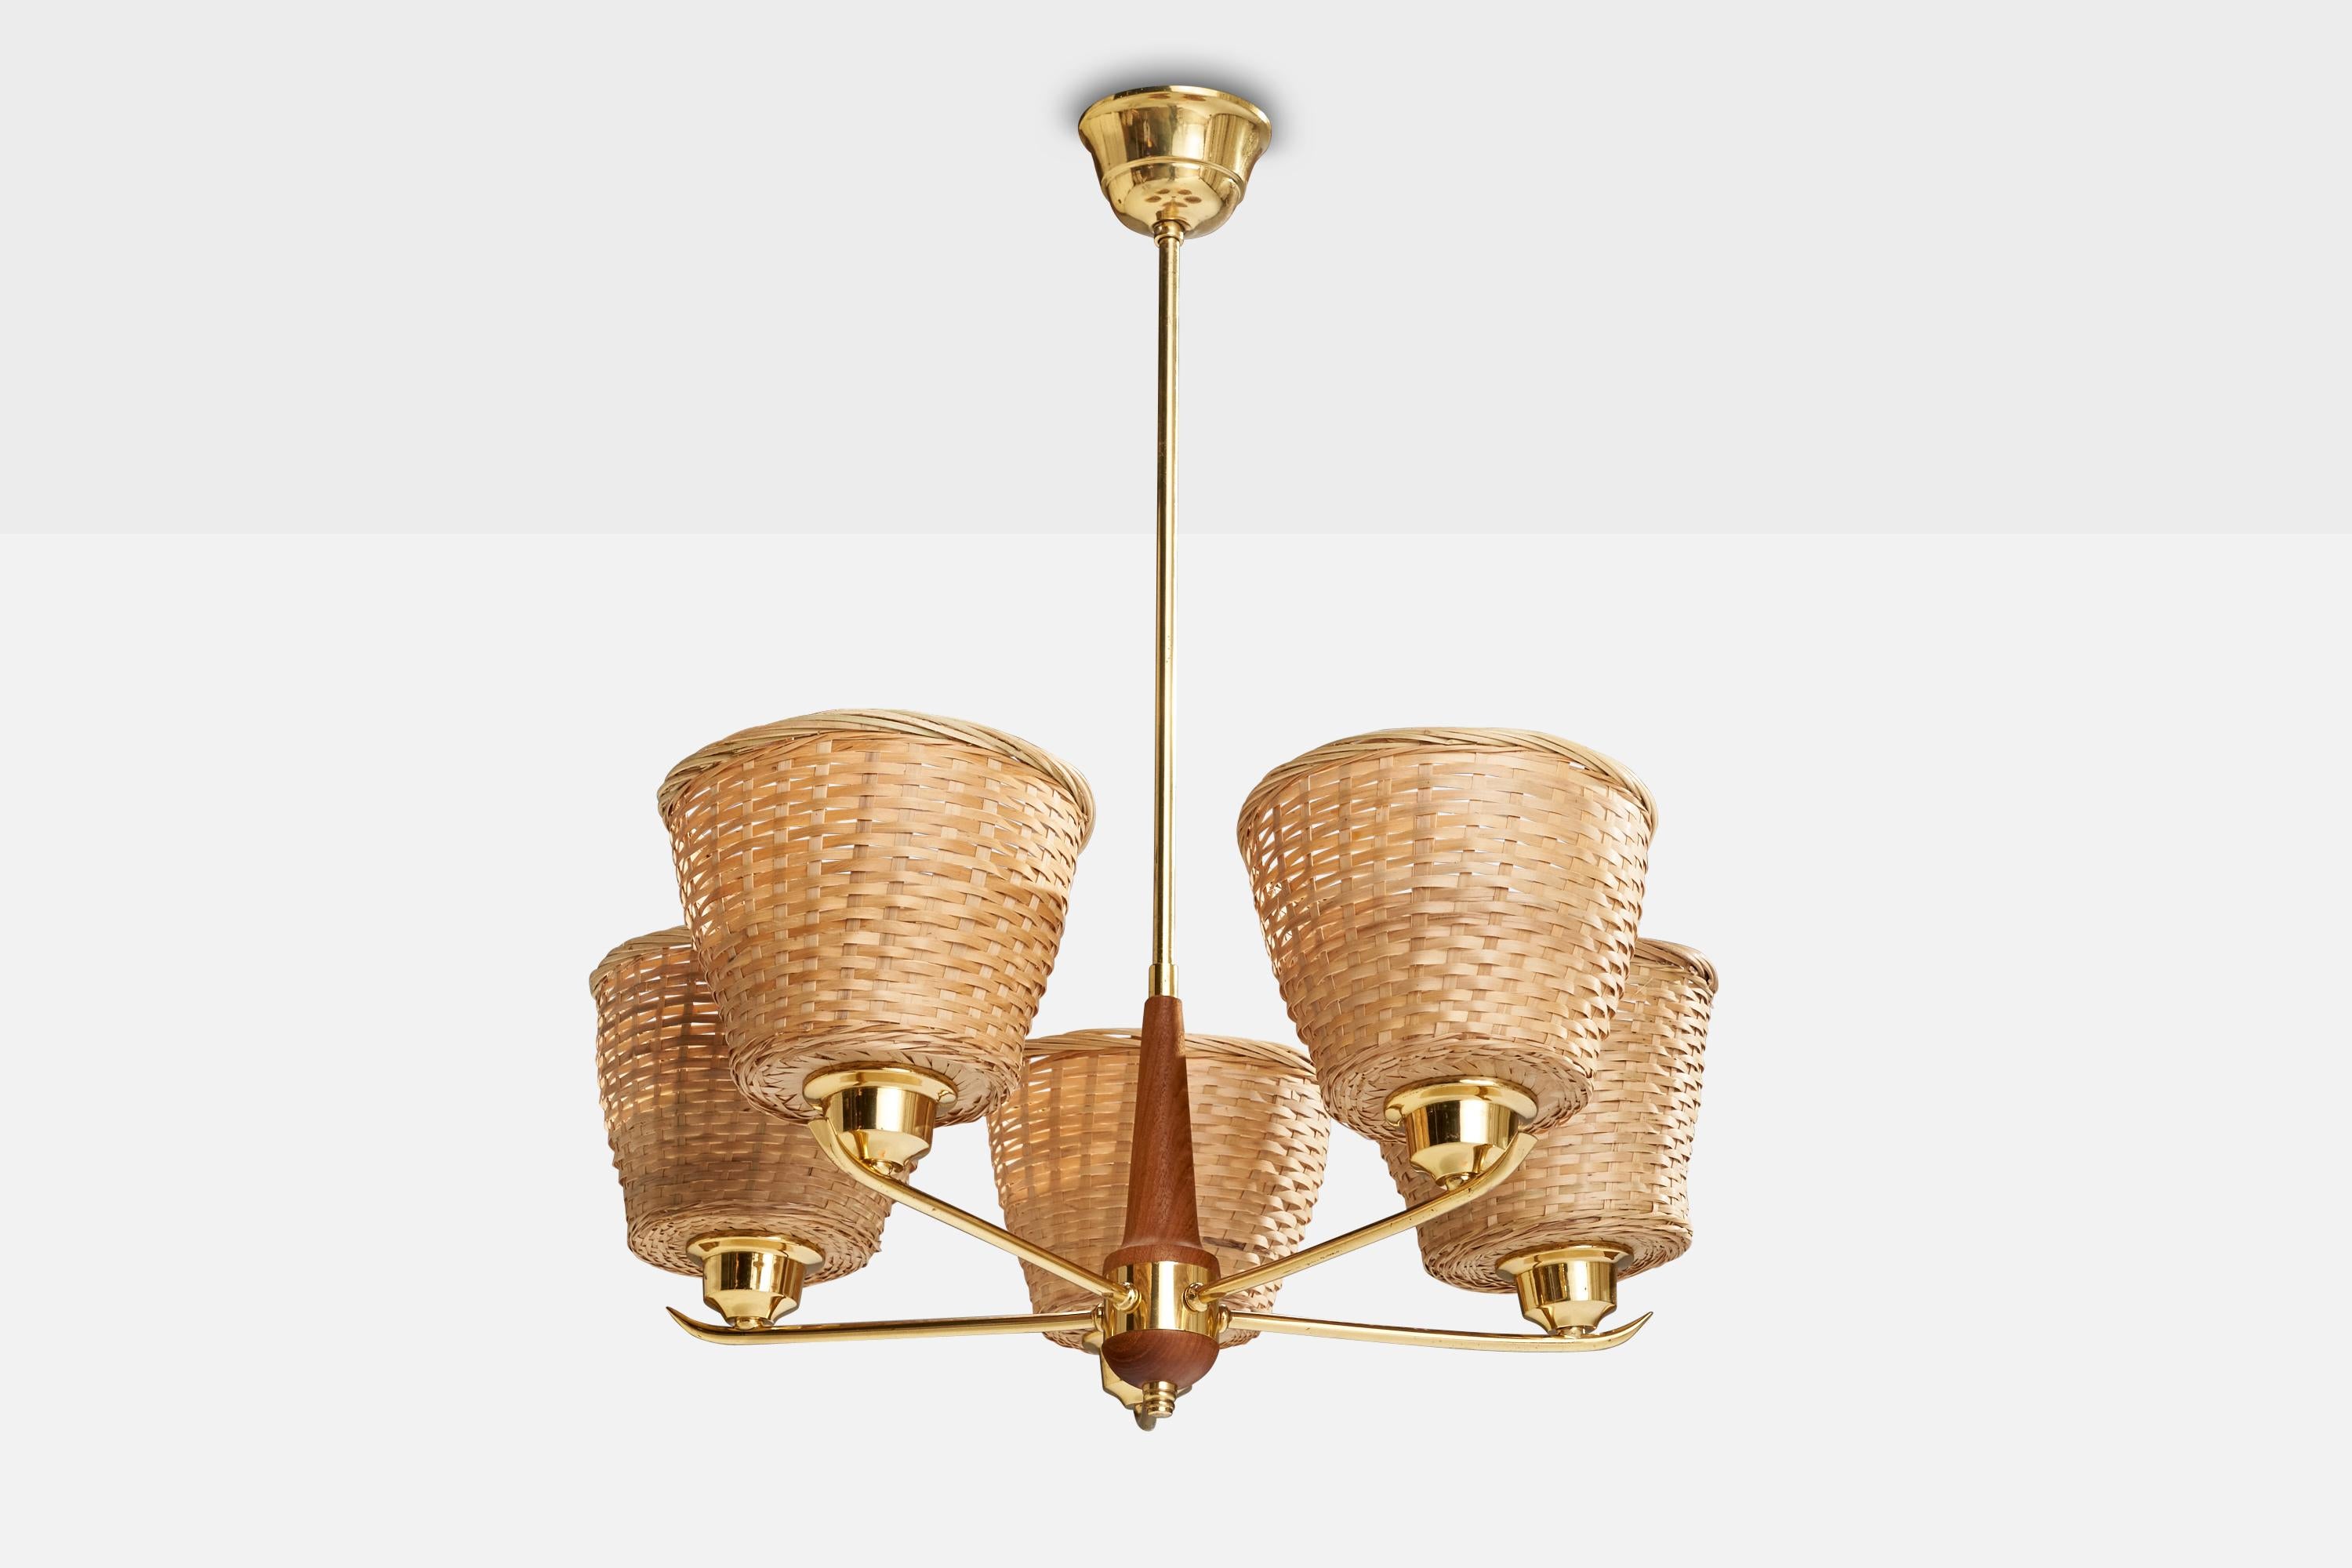 A brass, teak and rattan chandelier designed and produced in Sweden, c. 1950s.

Dimensions of canopy (inches): 1.85” H x 3.6” Diameter
Socket takes standard E-26 bulbs. 5 socket.There is no maximum wattage stated on the fixture. All lighting will be